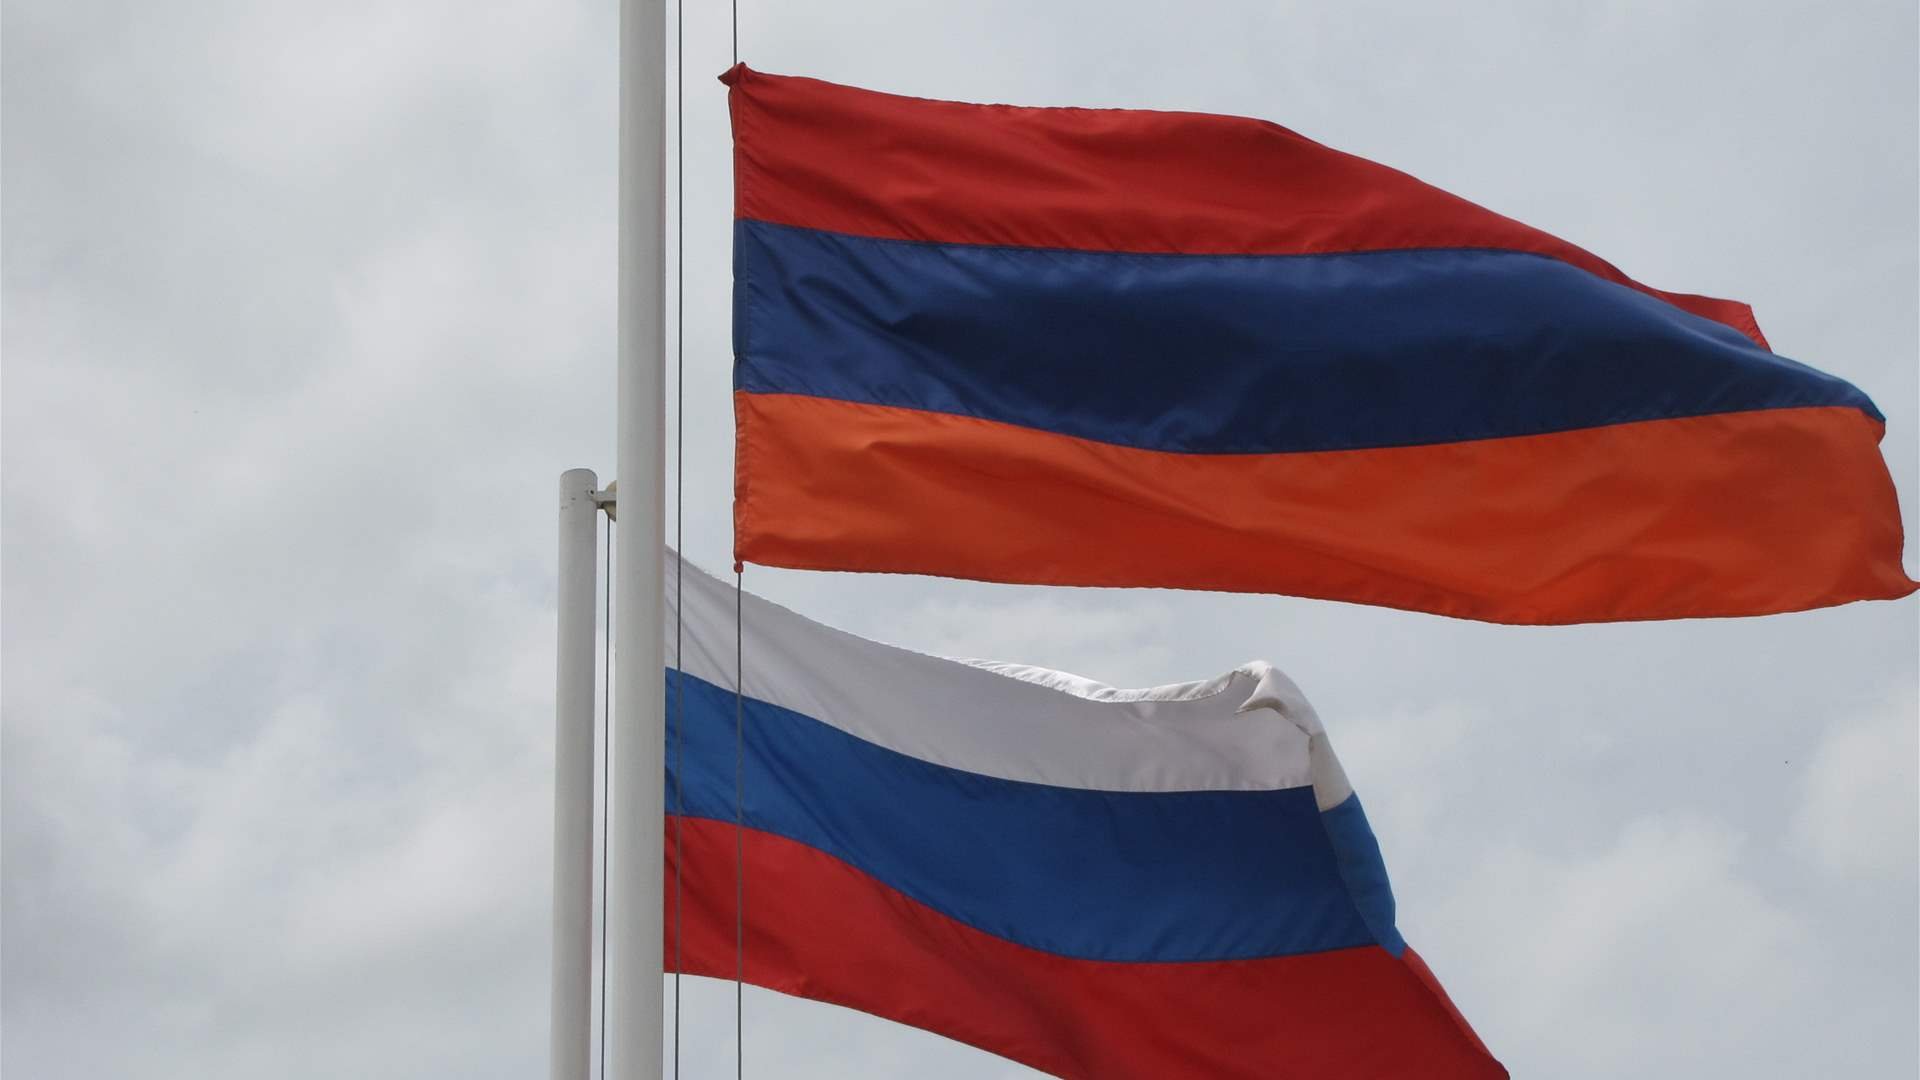 Russia says Armenia tries to cut off relations between the two countries